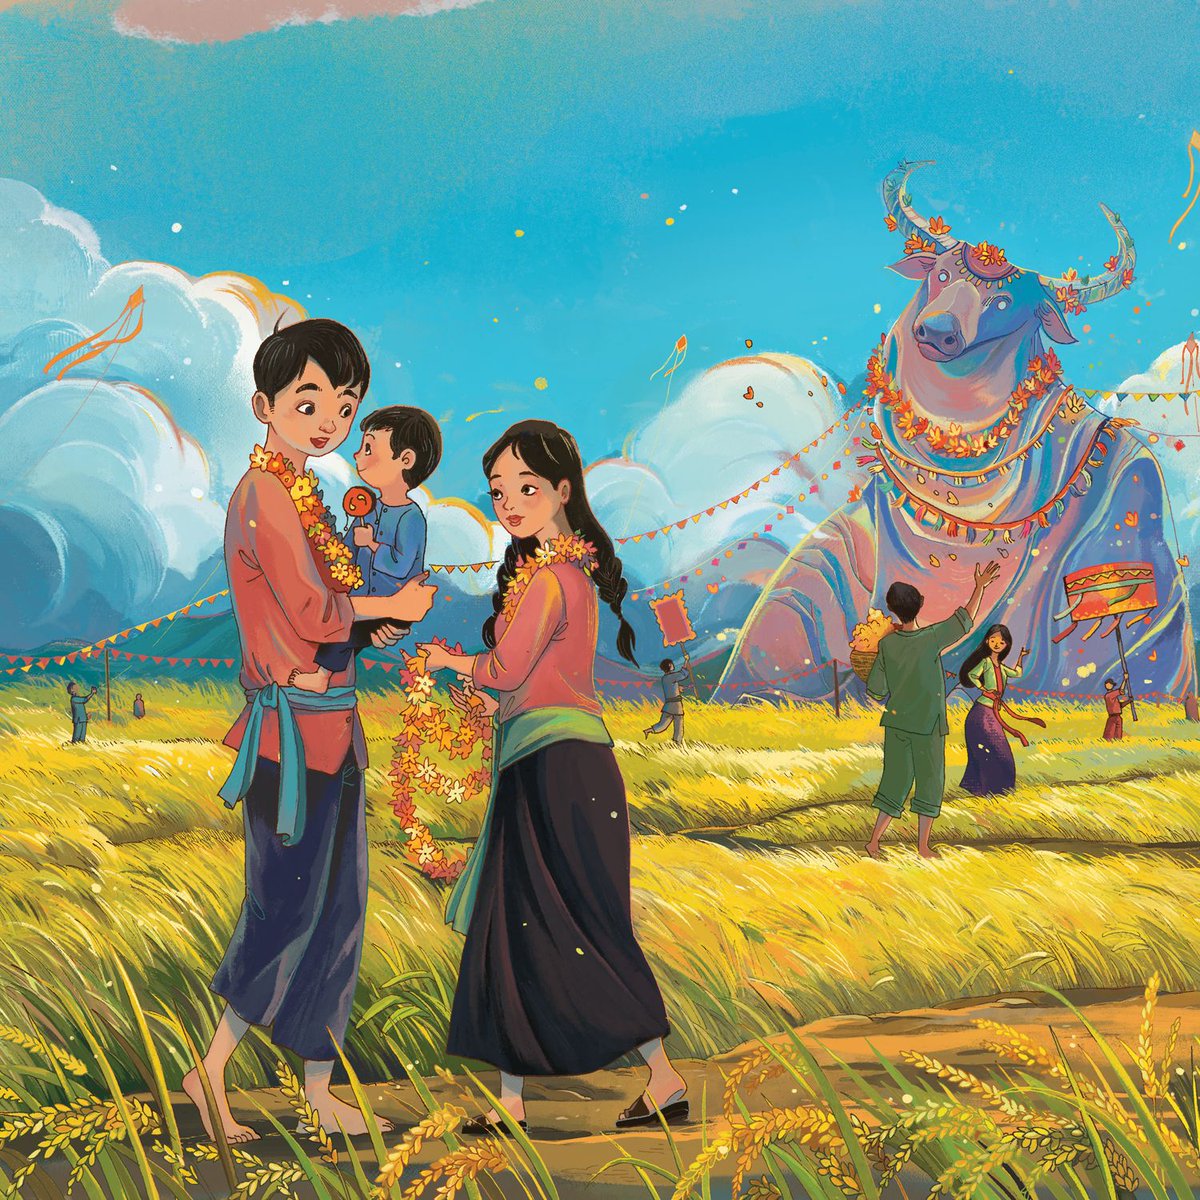 My Grandfather's Song by Quang & Lien 

buff.ly/3JTb8v0 

#picturebook #picturebooks #mygrandfatherssong #vietnam #grandfather #grandparent #childrenswritersguild #childrensillustrator #childrens_illustration #childrensbookart #childrensbookillustration #moreillustrations